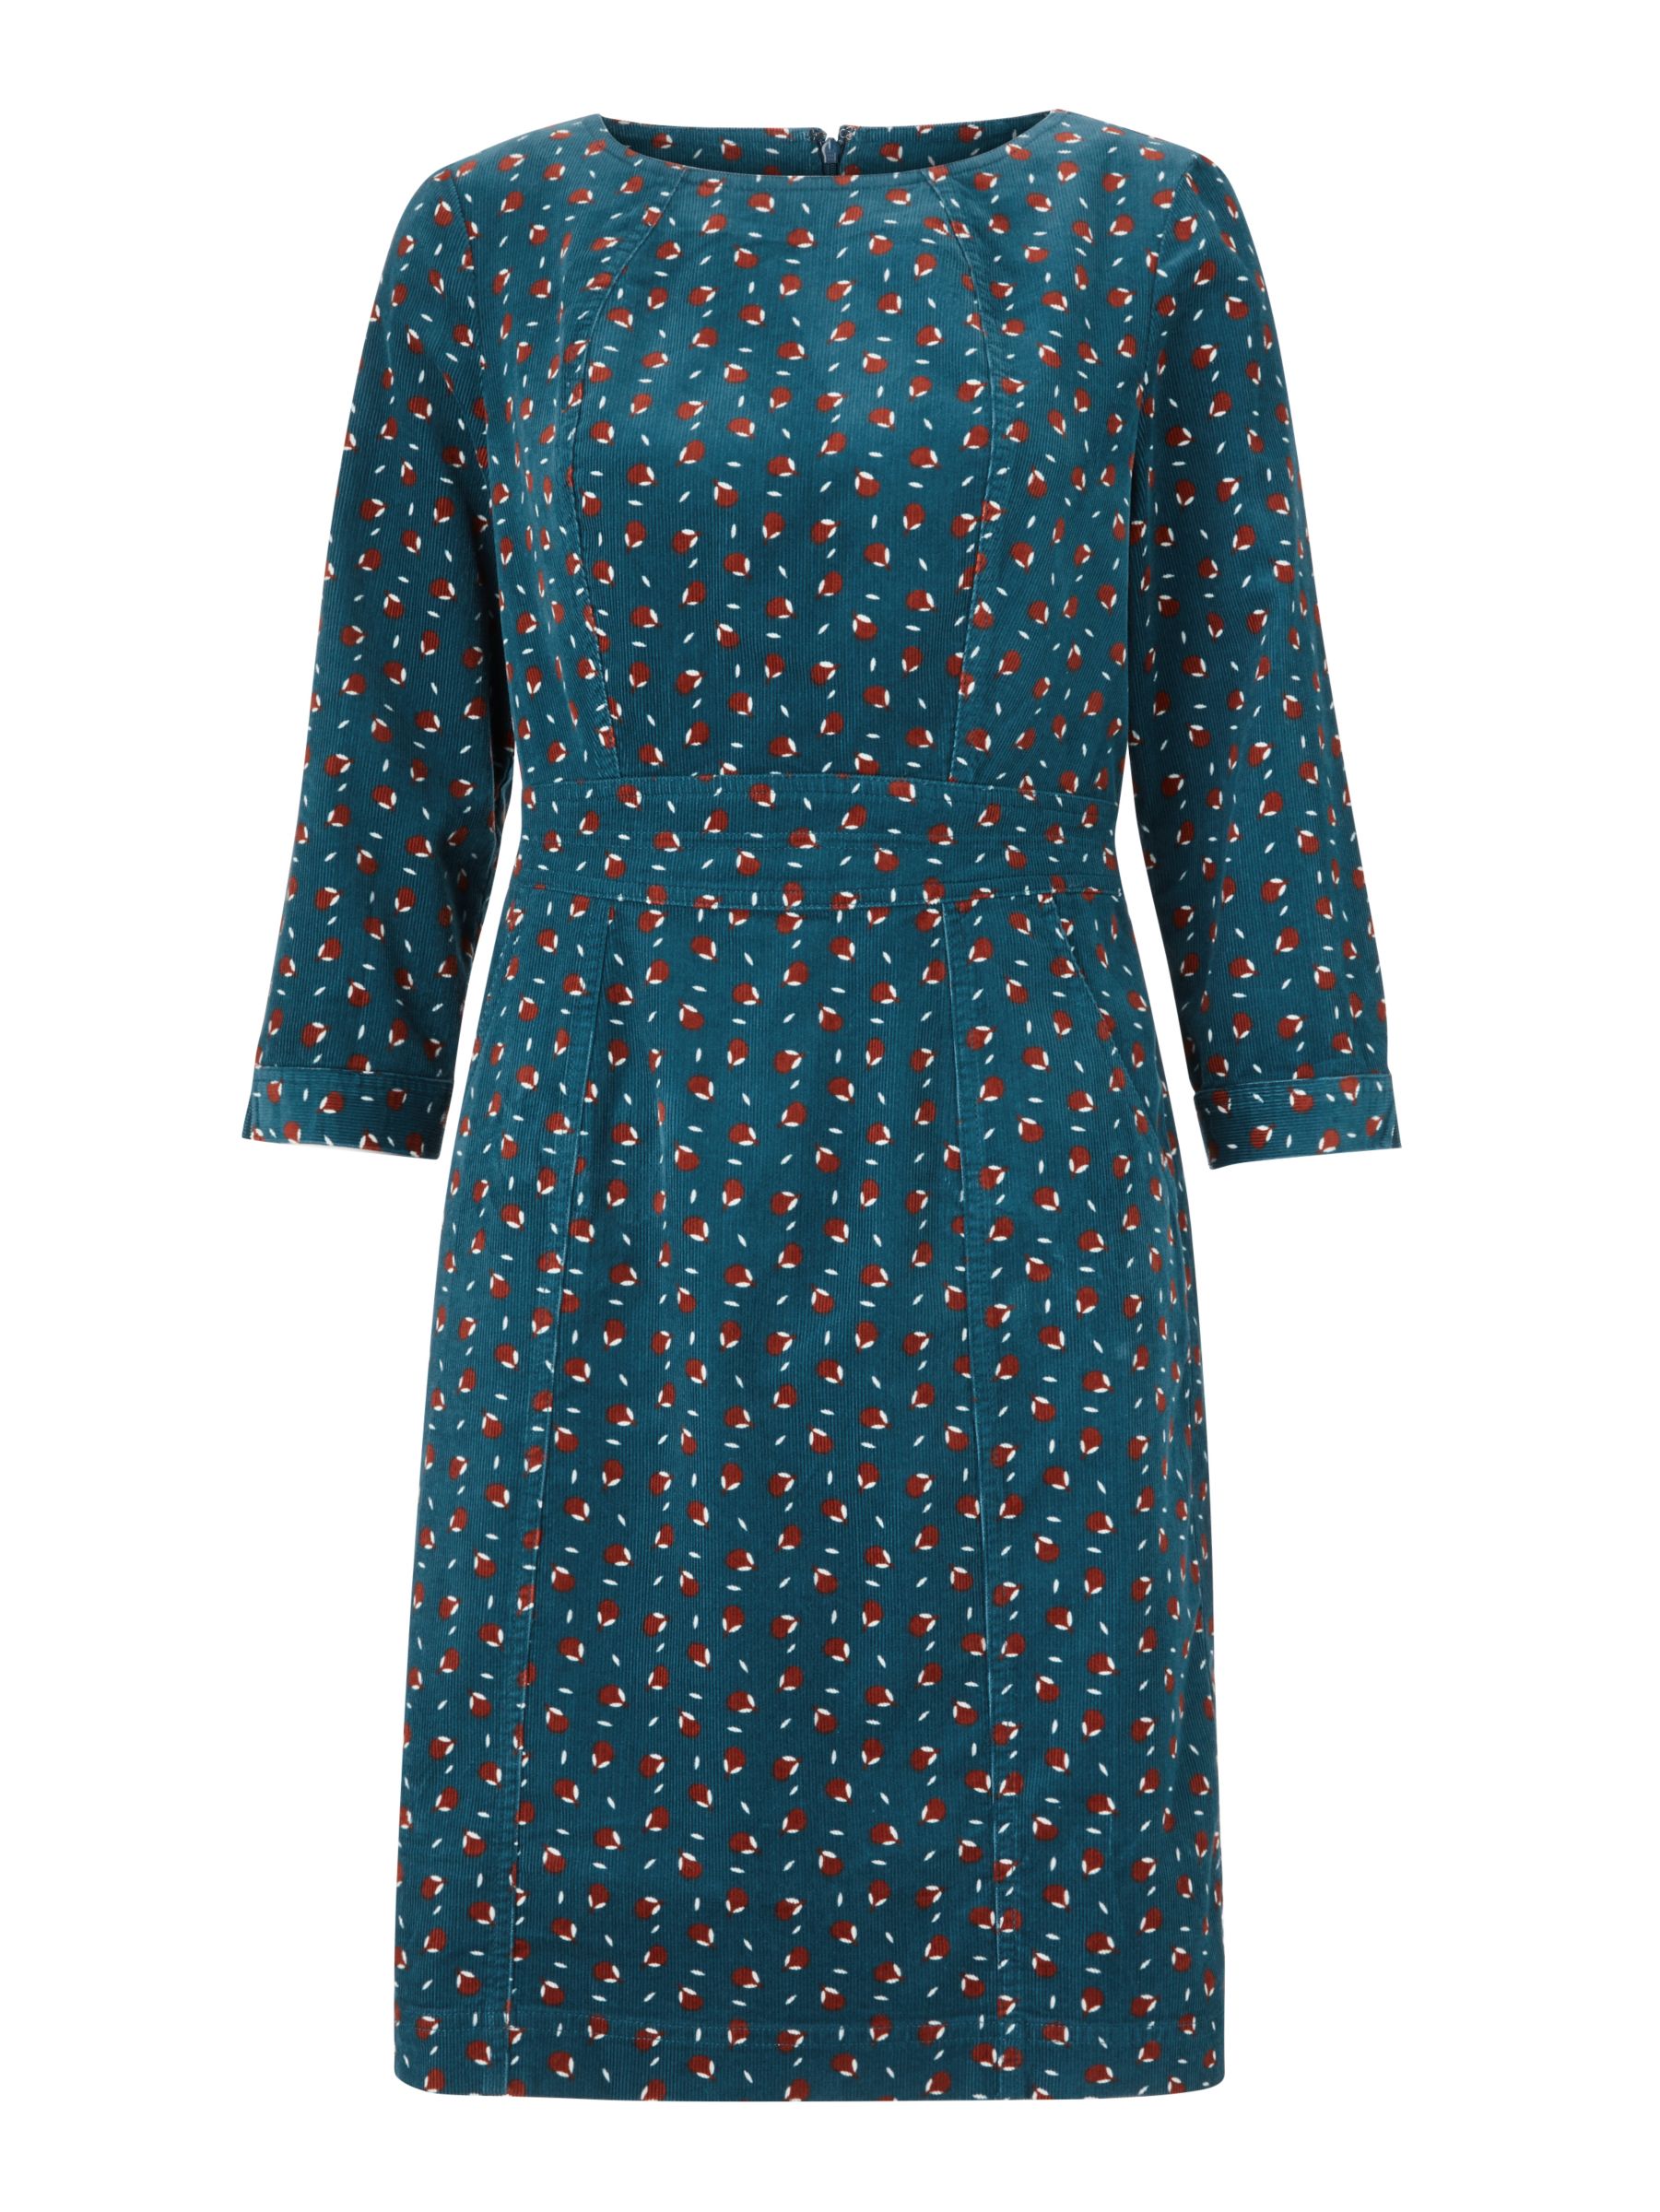 Boden Coraline Cord Dress, Baltic Pear at John Lewis & Partners